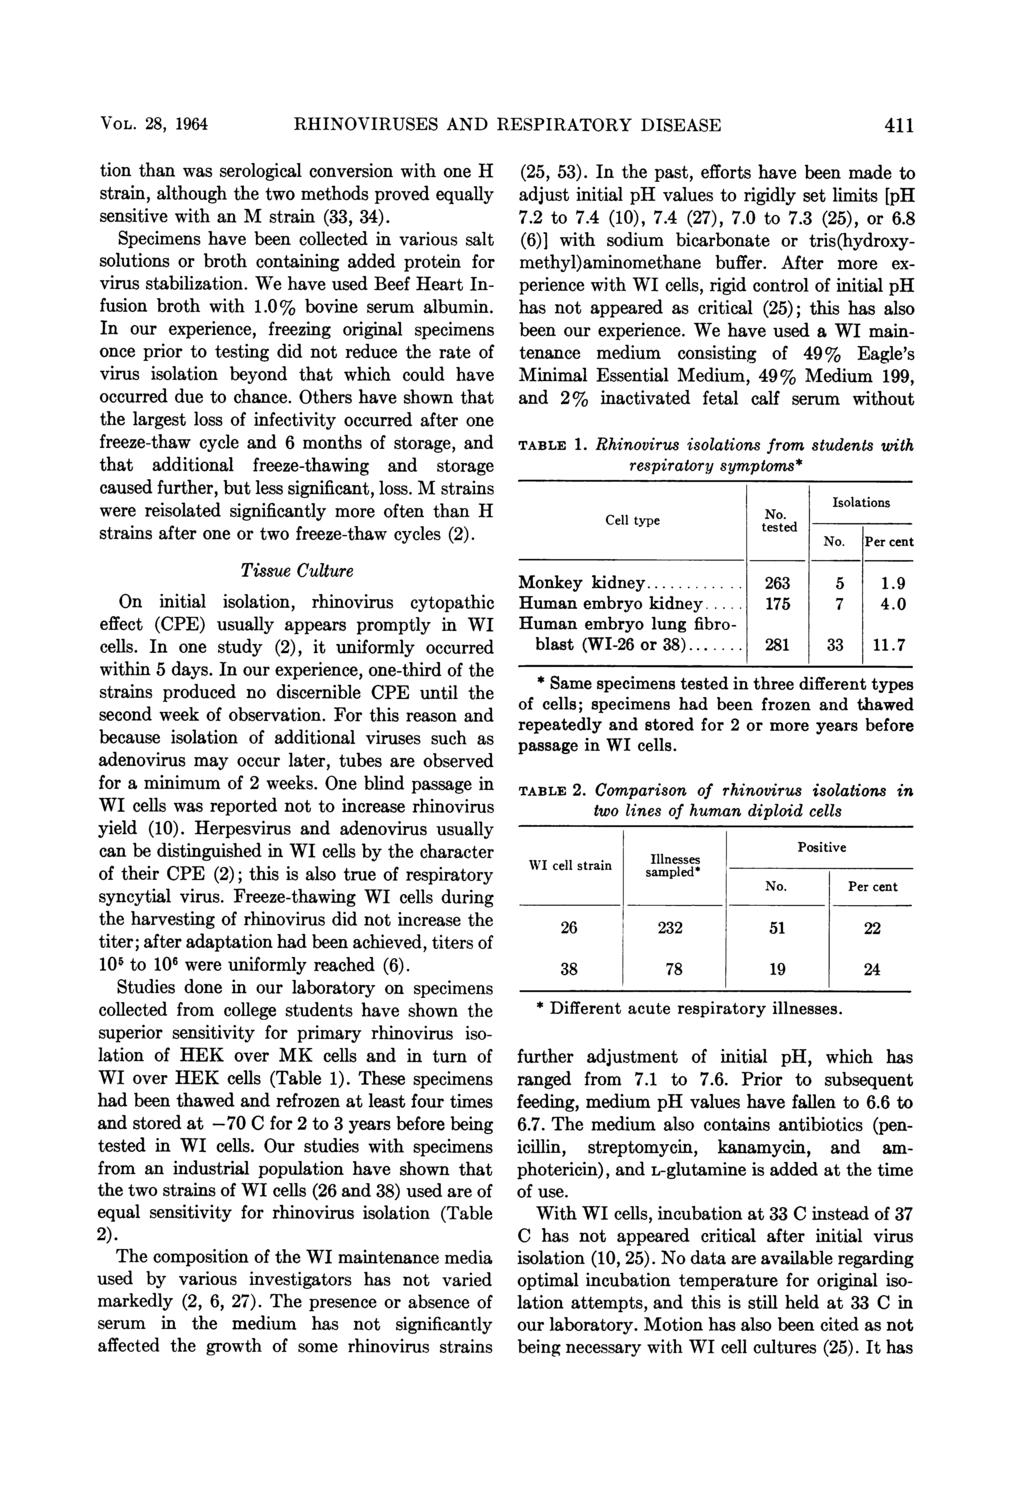 VOL. 28, 1964 RHINOVIRUSES AND RESPIRATORY DISEASE 411 tion than was serological conversion with one H strain, although the two methods proved equally sensitive with an M strain (33, 34).